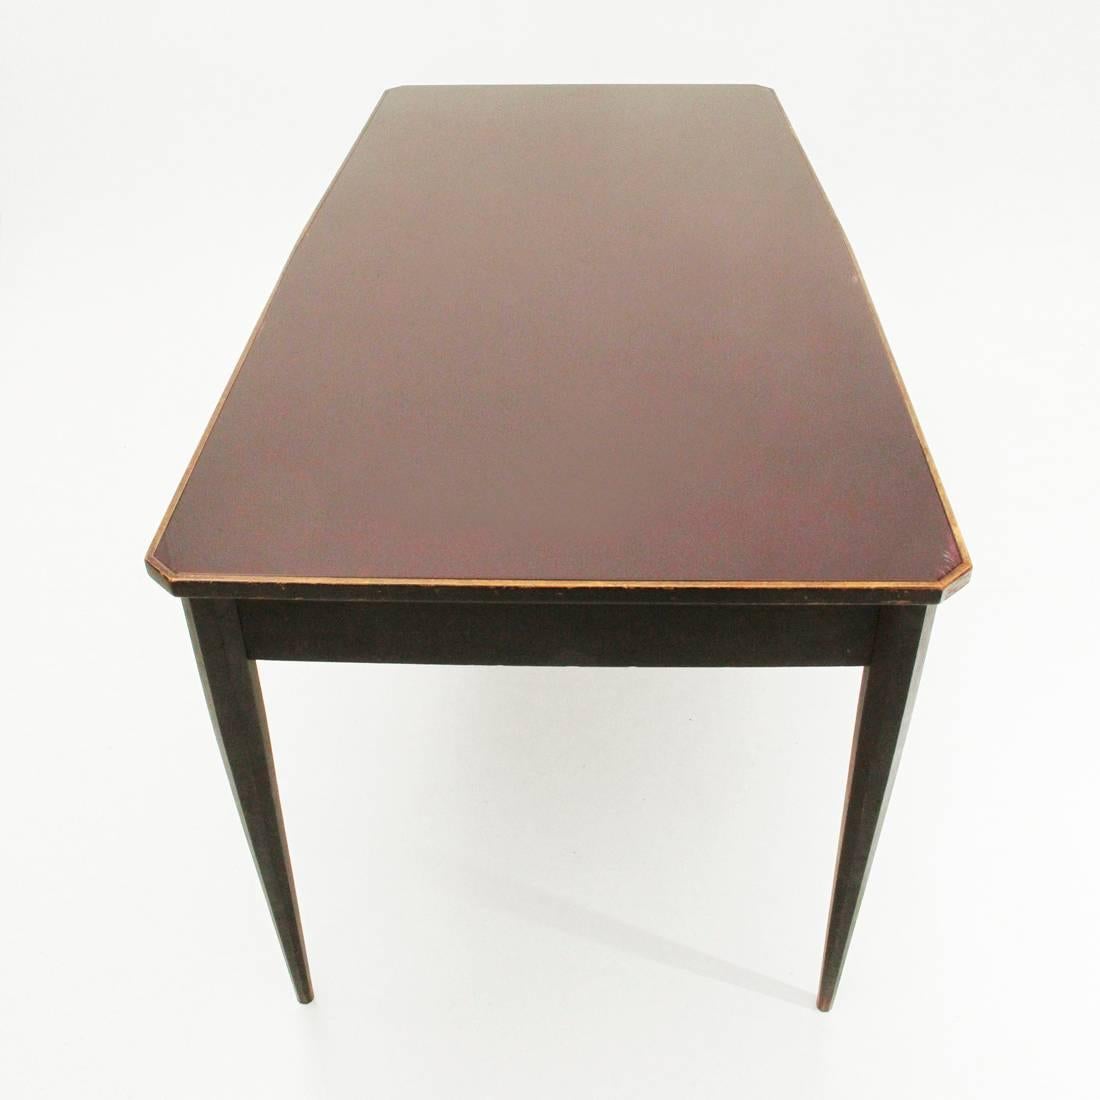 Italian table produced in the 1960s.
Legs and crosspieces in black painted wood.
Top in black painted wood with bordeaux glass top.
Legs of octagonal shape that thins in the final.
Structure in good condition, lack of paint on the edge of the